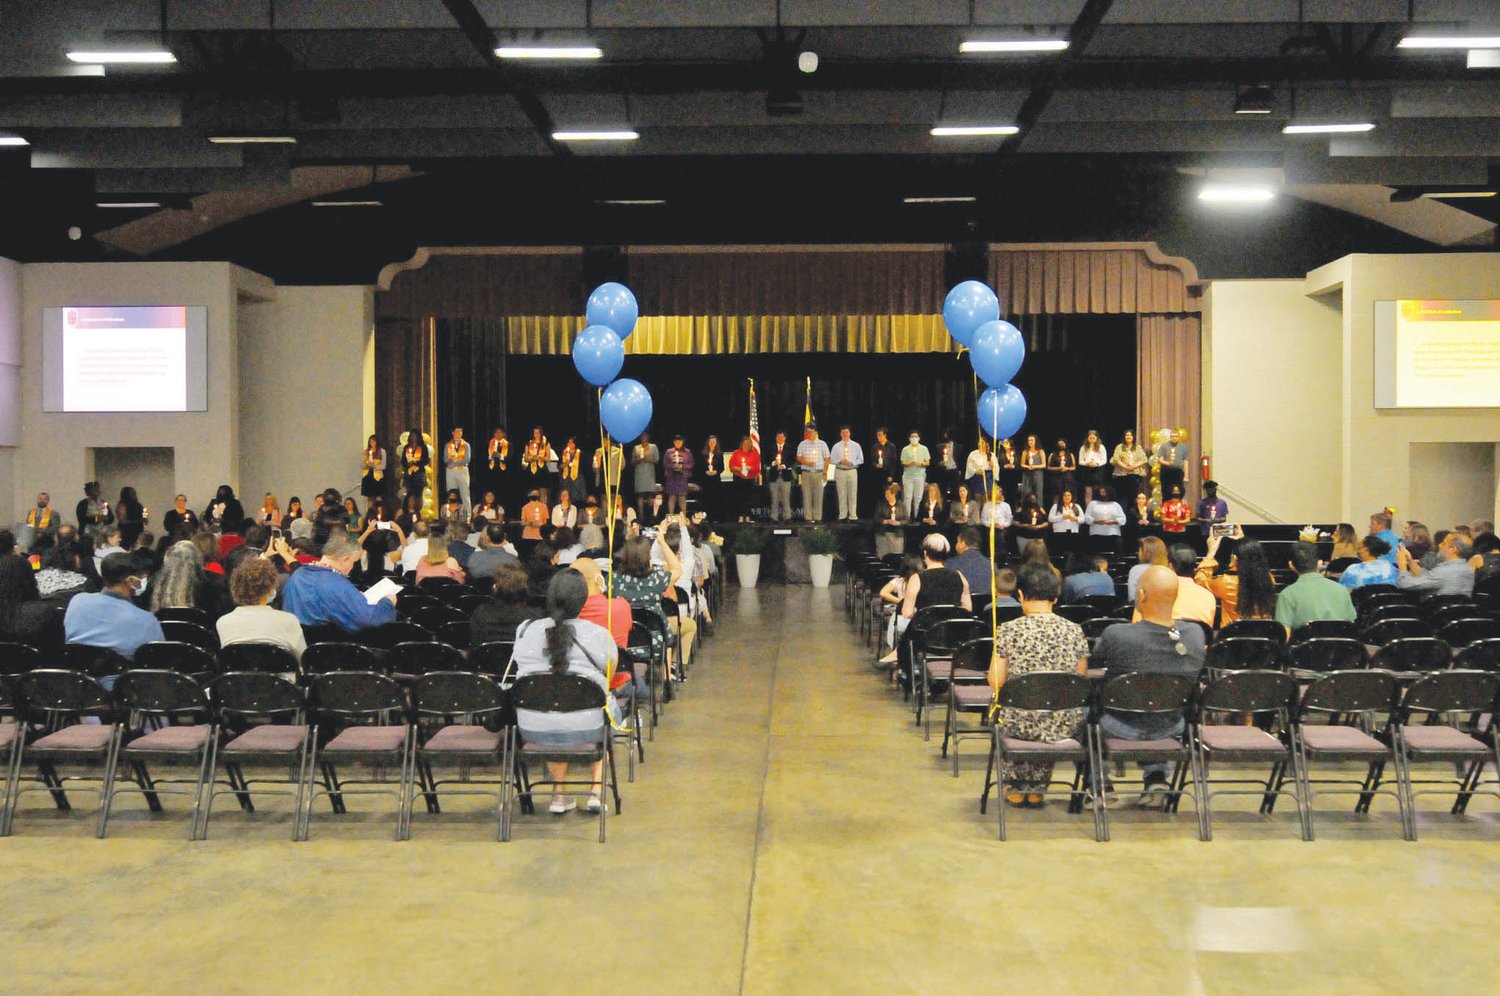 A scene from the Central Carolina Community College Beta Sigma Phi Chapter of Phi Theta Kappa International Honor Society induction ceremony.